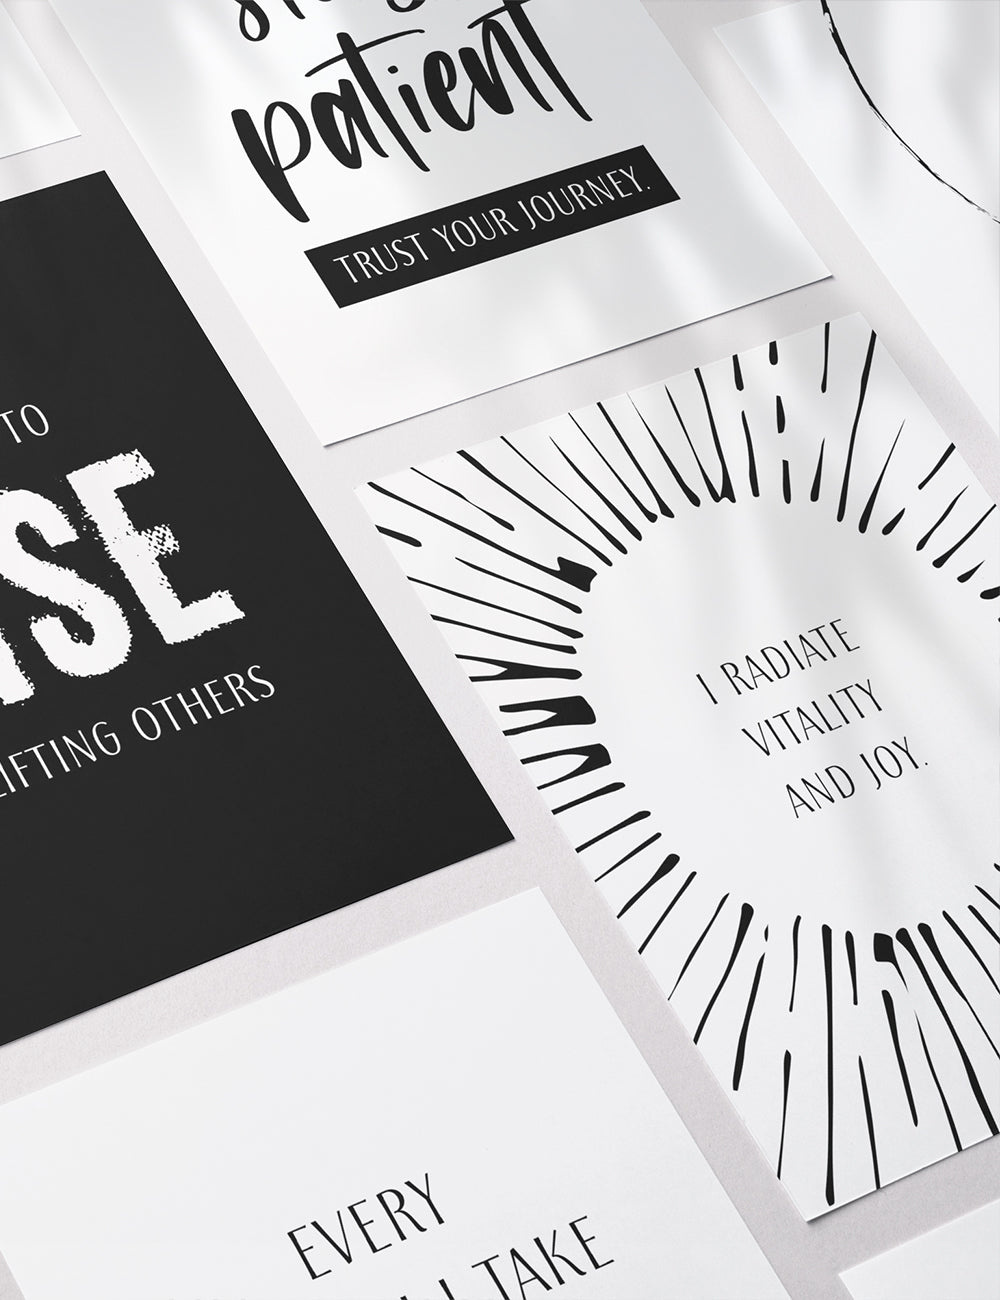 Vision Board Printables | Printable Vision Board Kit | Printable Affirmation Cards | Inspirational & Motivational Quotes | Printable Quotes | Printable Journal & Planner Cards | 3.5x5 | 3x4 | 2x3 | PDF + JPEG | Planner Printables | Planner Accessories | Black and White | Clean Design | Minimal Aesthetic